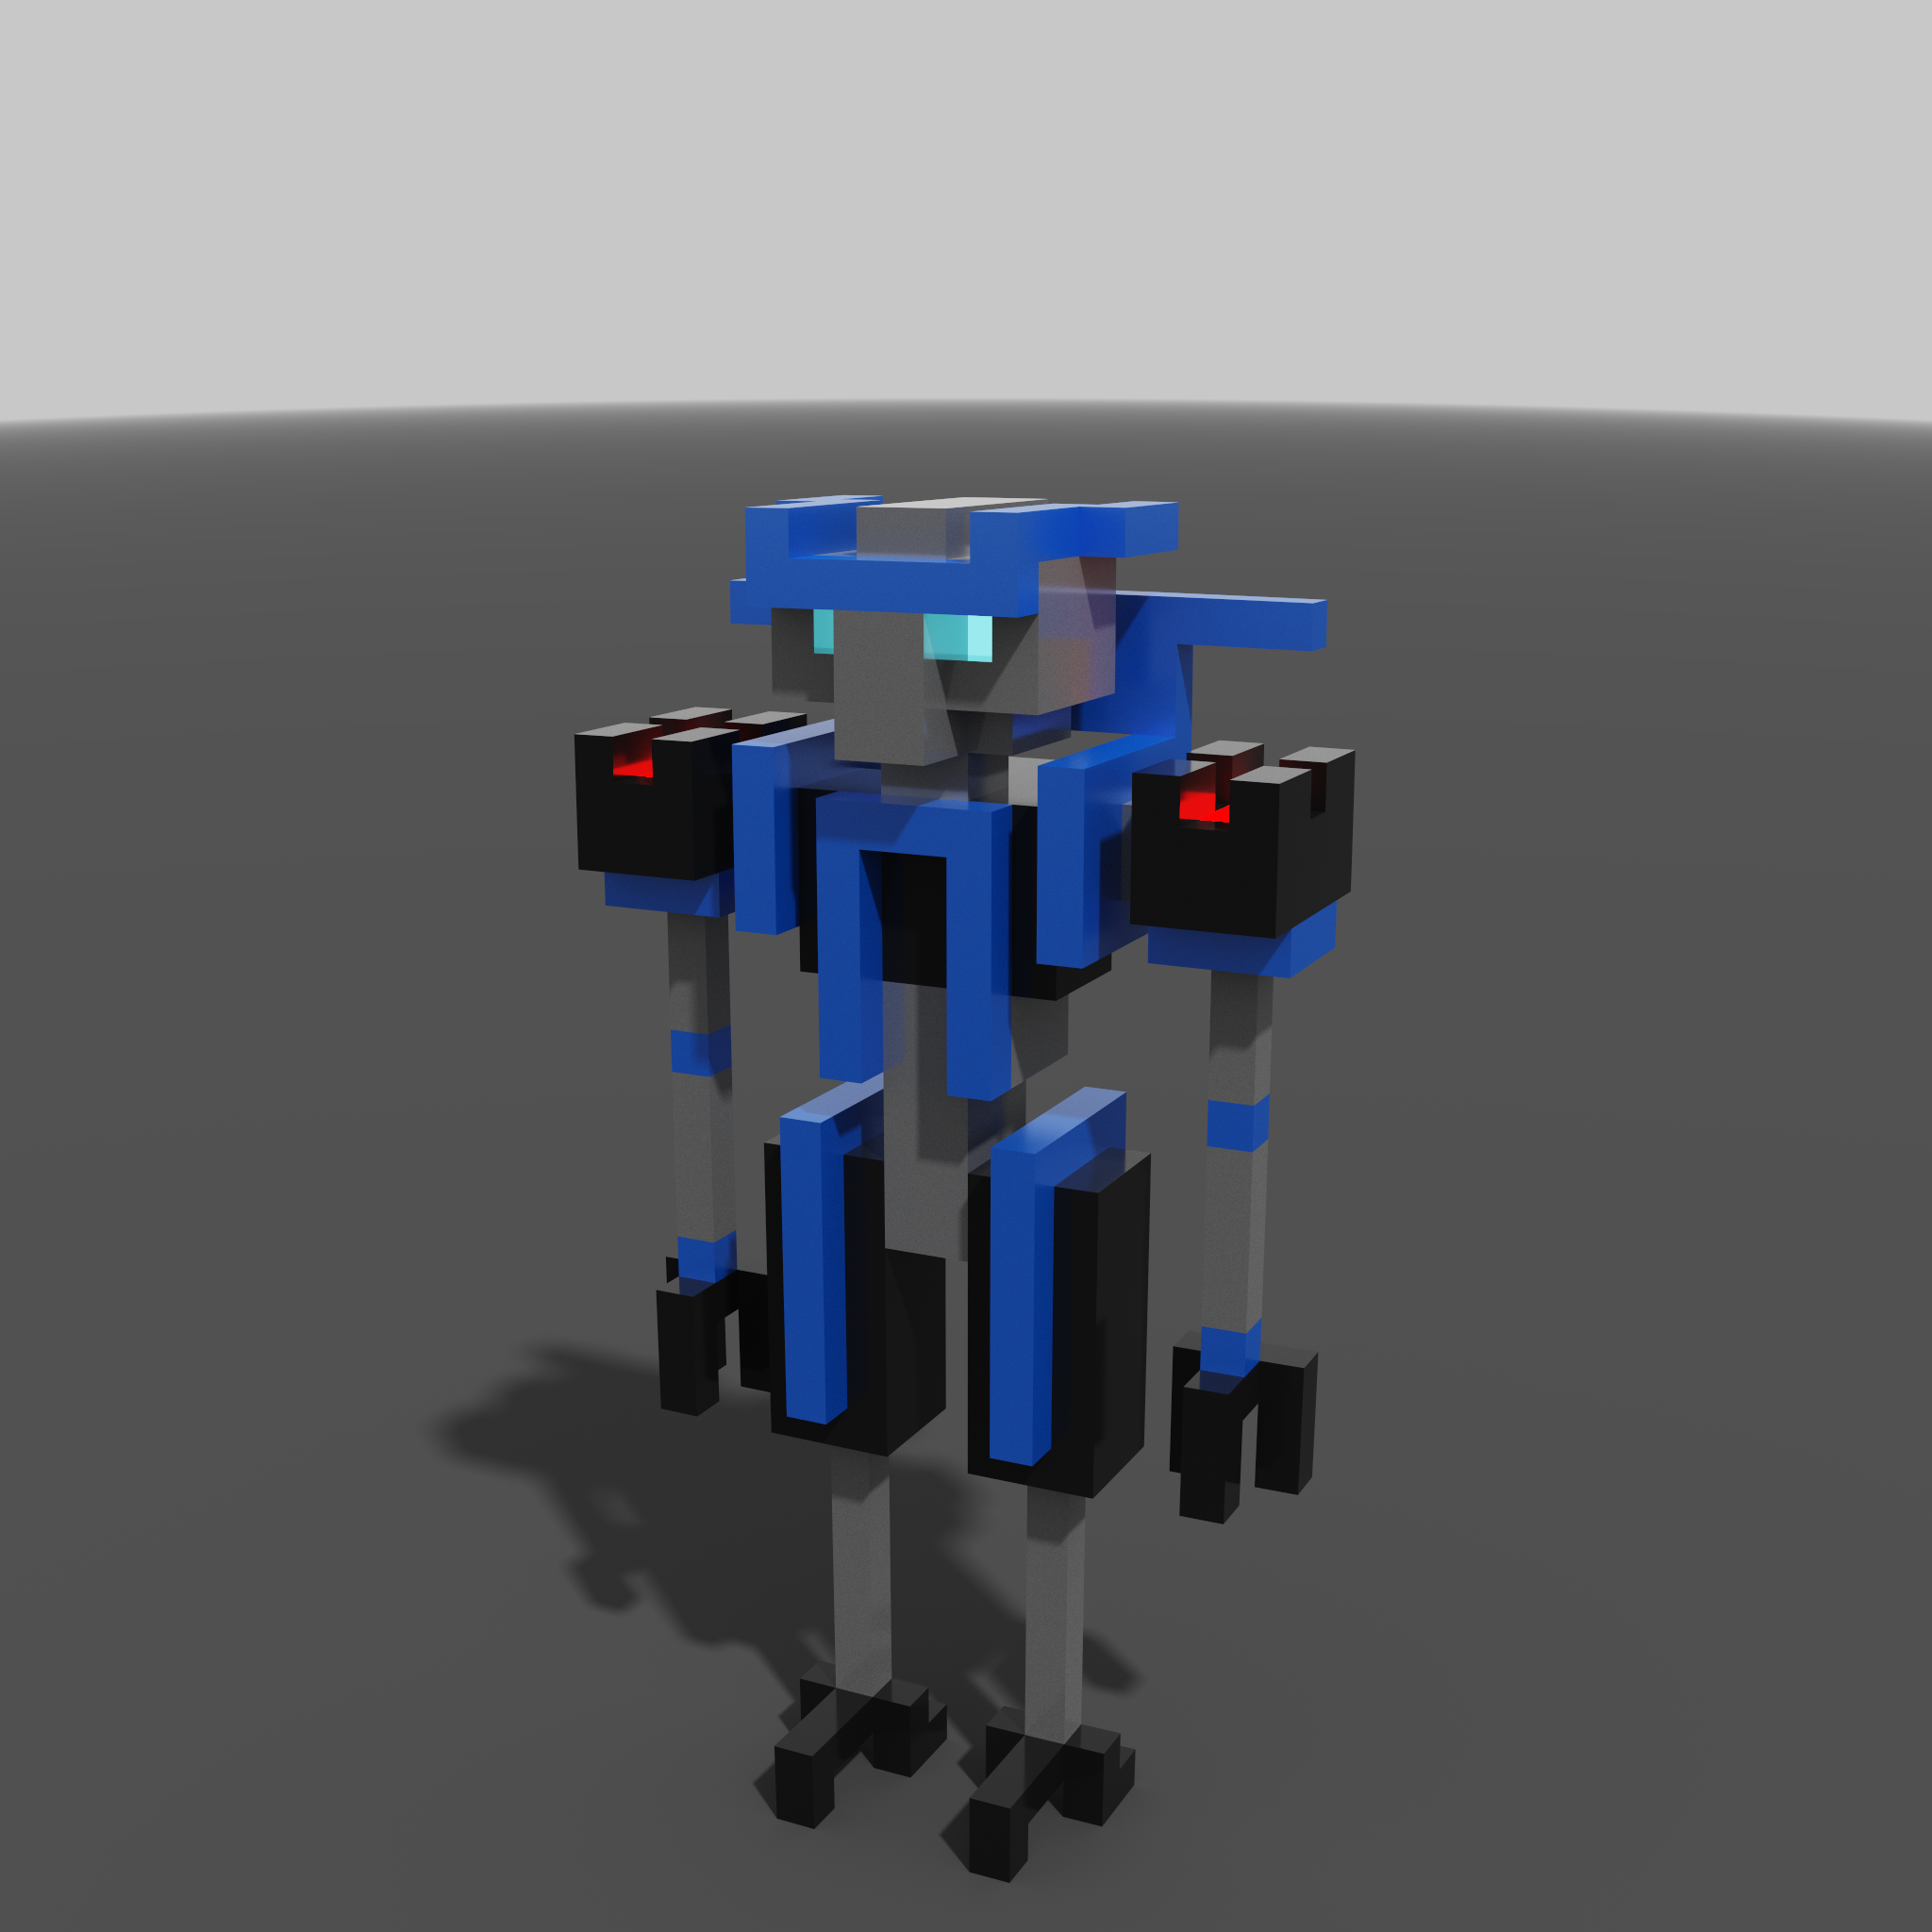 Post by prop_hunterrrrrrr in Concepts - Drone in the Danger style - itch.io